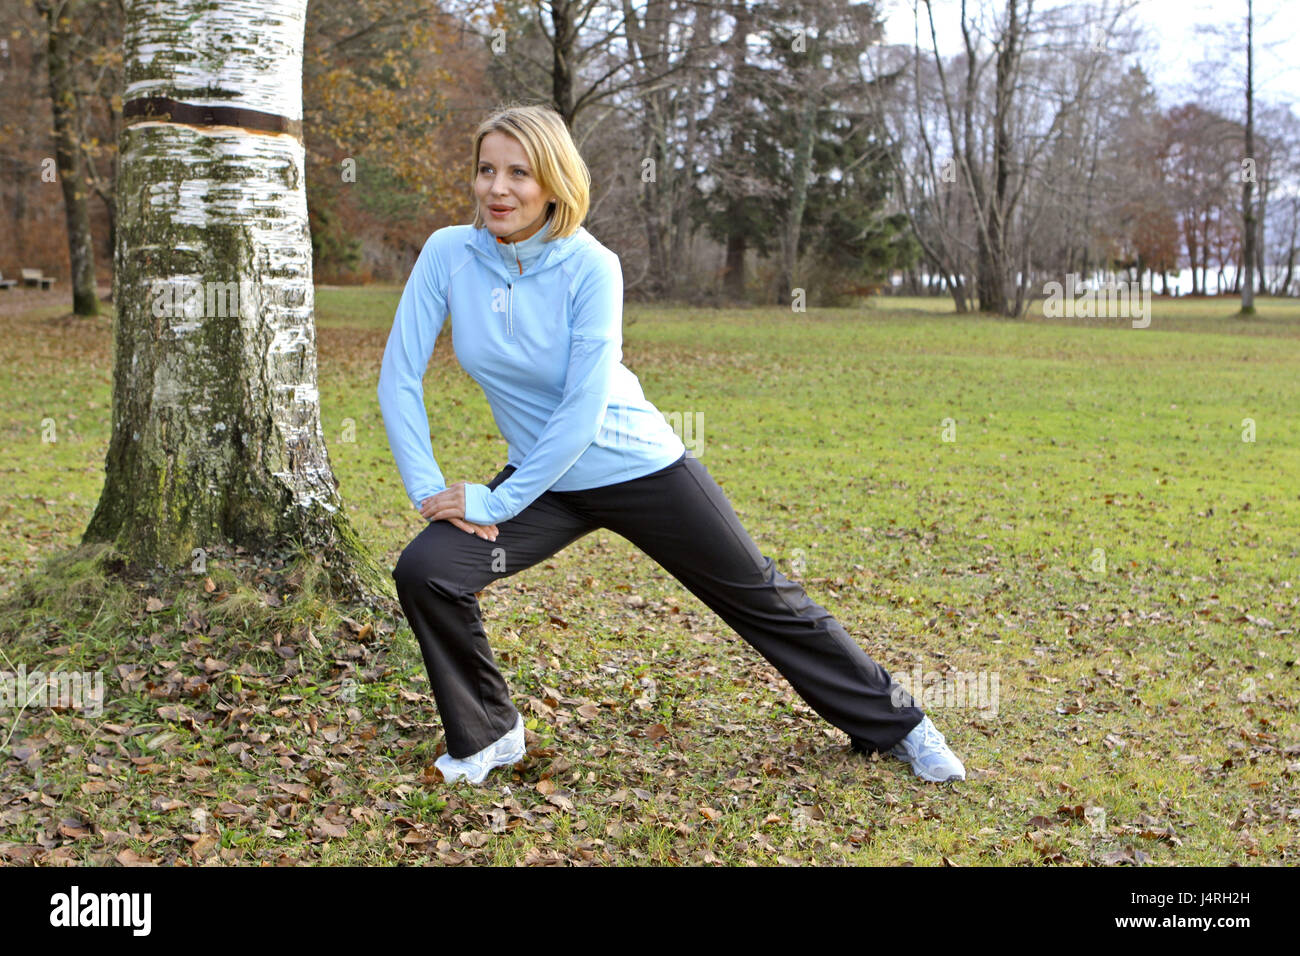 Blond woman, with the jogging in an autumn wood, Stretching, model released, Stock Photo